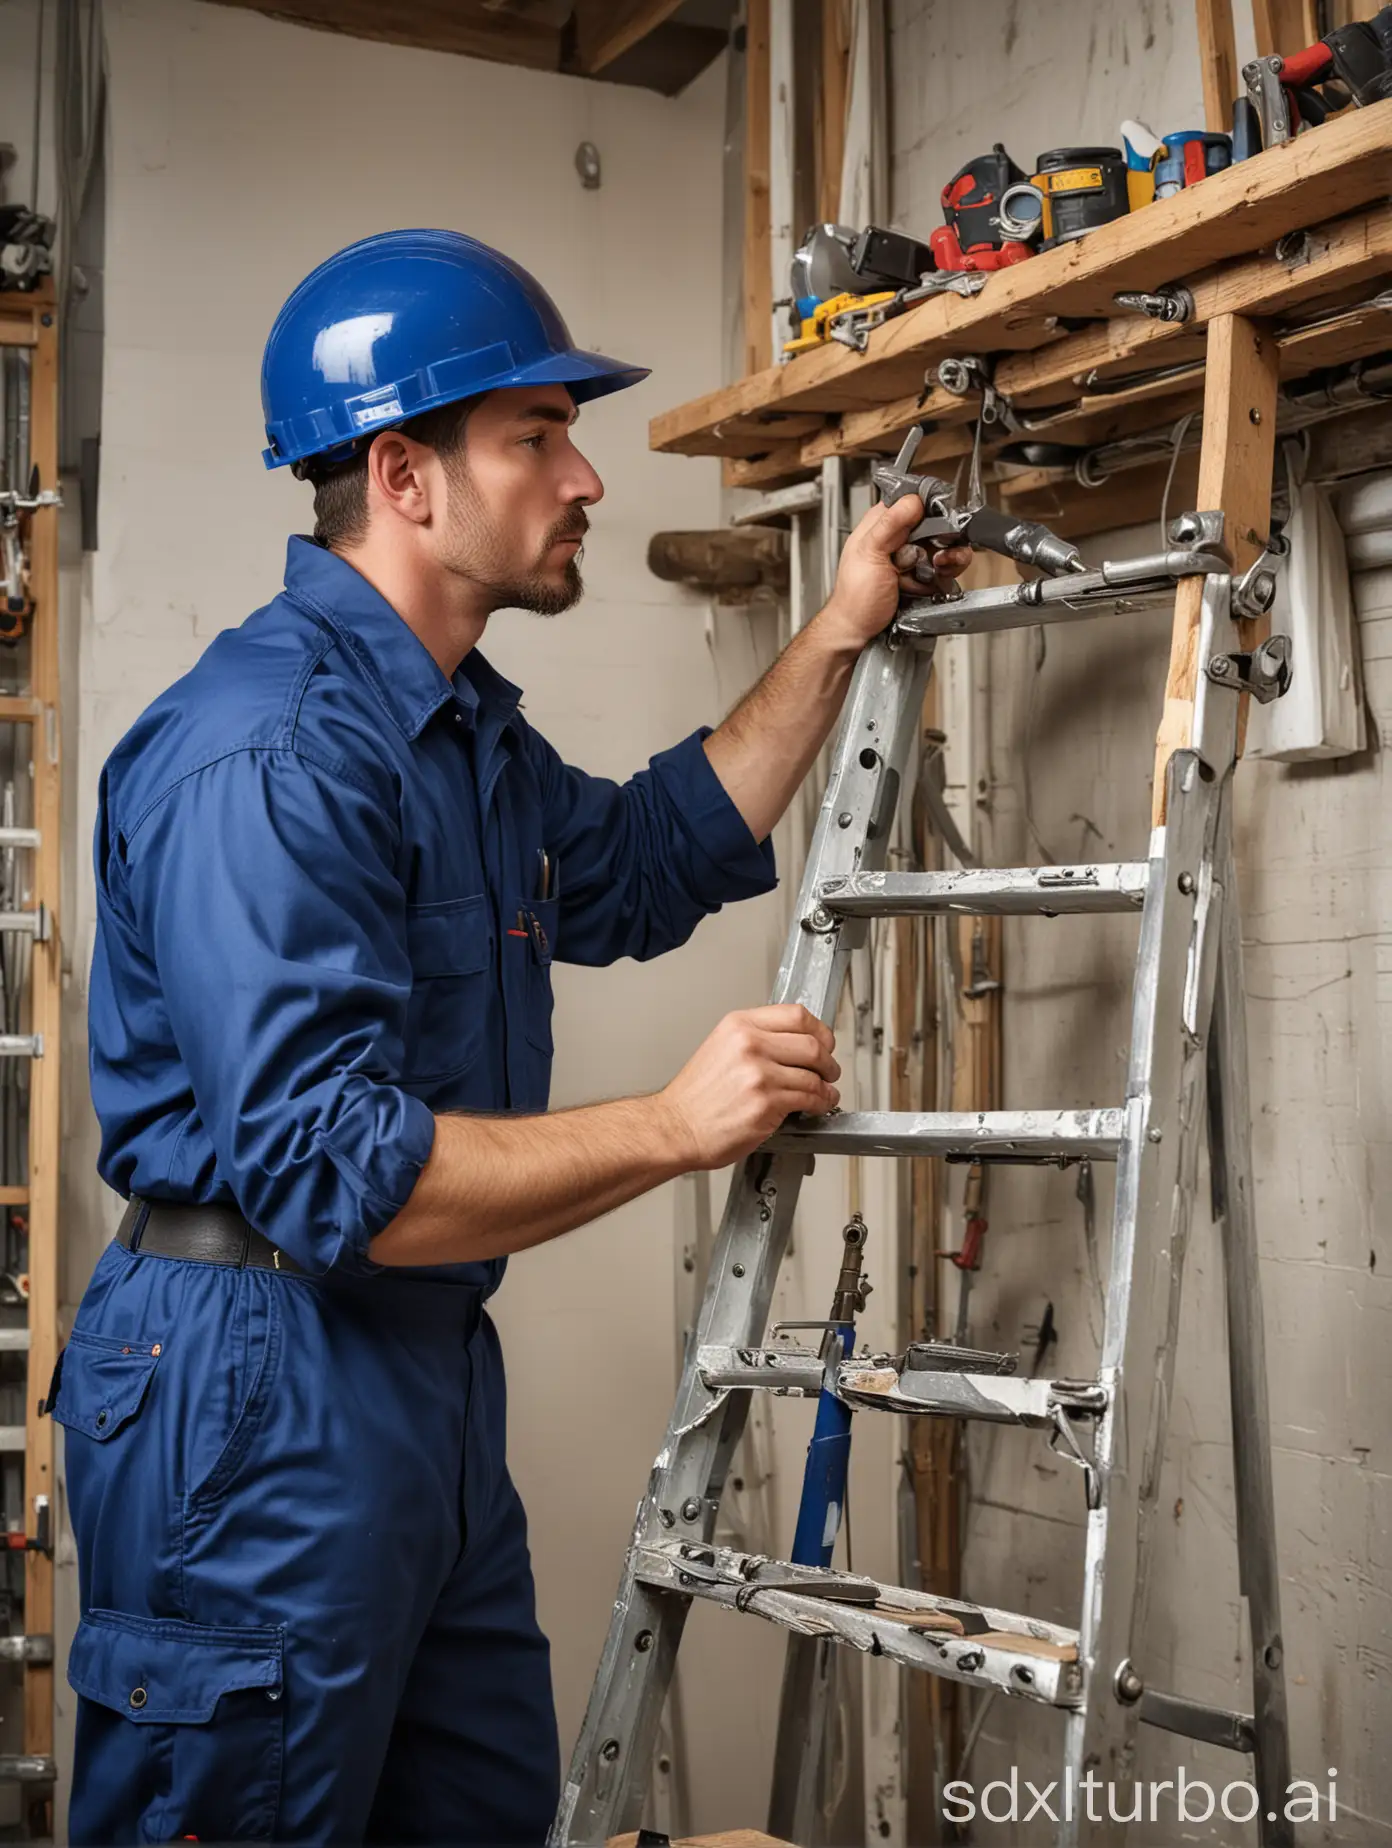 A plumber wearing a blue uniform and a hard hat is working on a pipe. He is using a wrench to tighten a joint. The plumber is standing on a ladder and is surrounded by tools and materials.